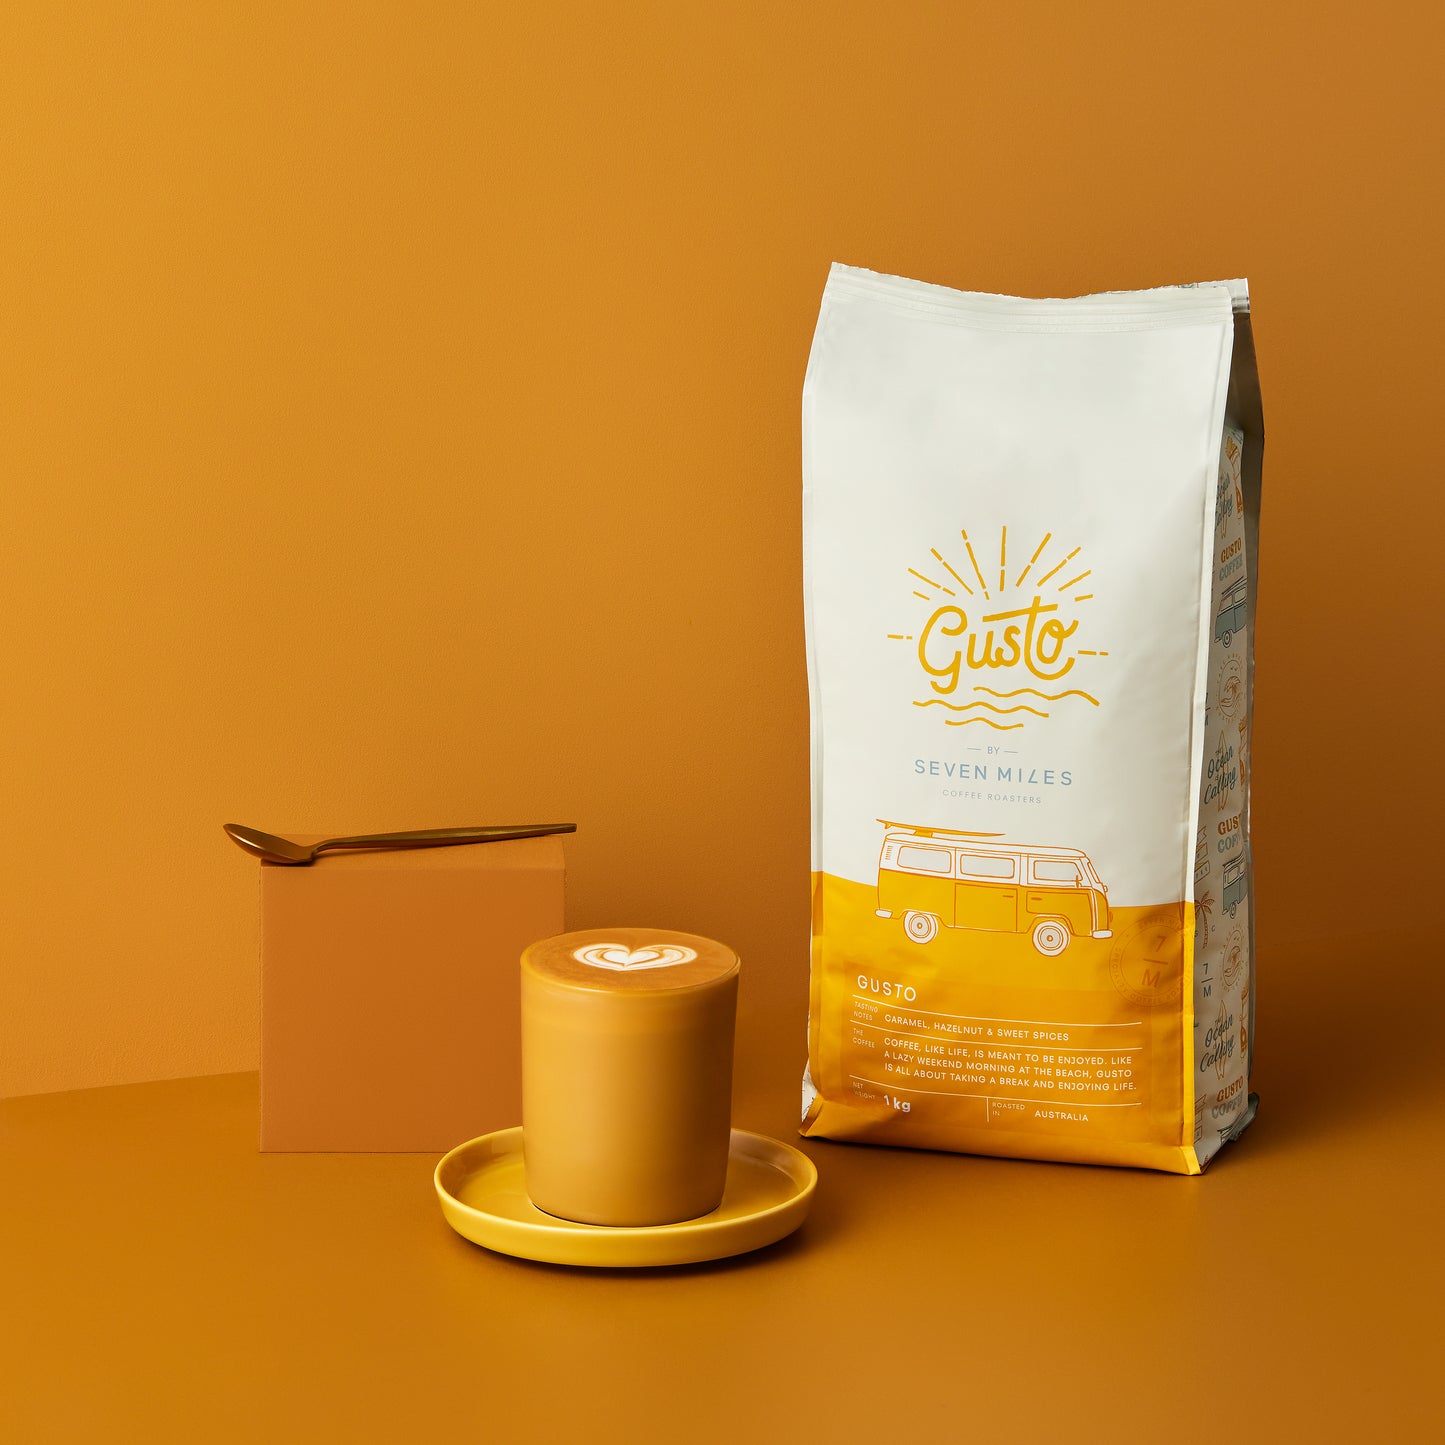 1x 1kg bag of Gusto Coffee by Seven Miles. Once glass coffee cup with a milky latte in the glass. A yellow box with a teaspoon on top. 